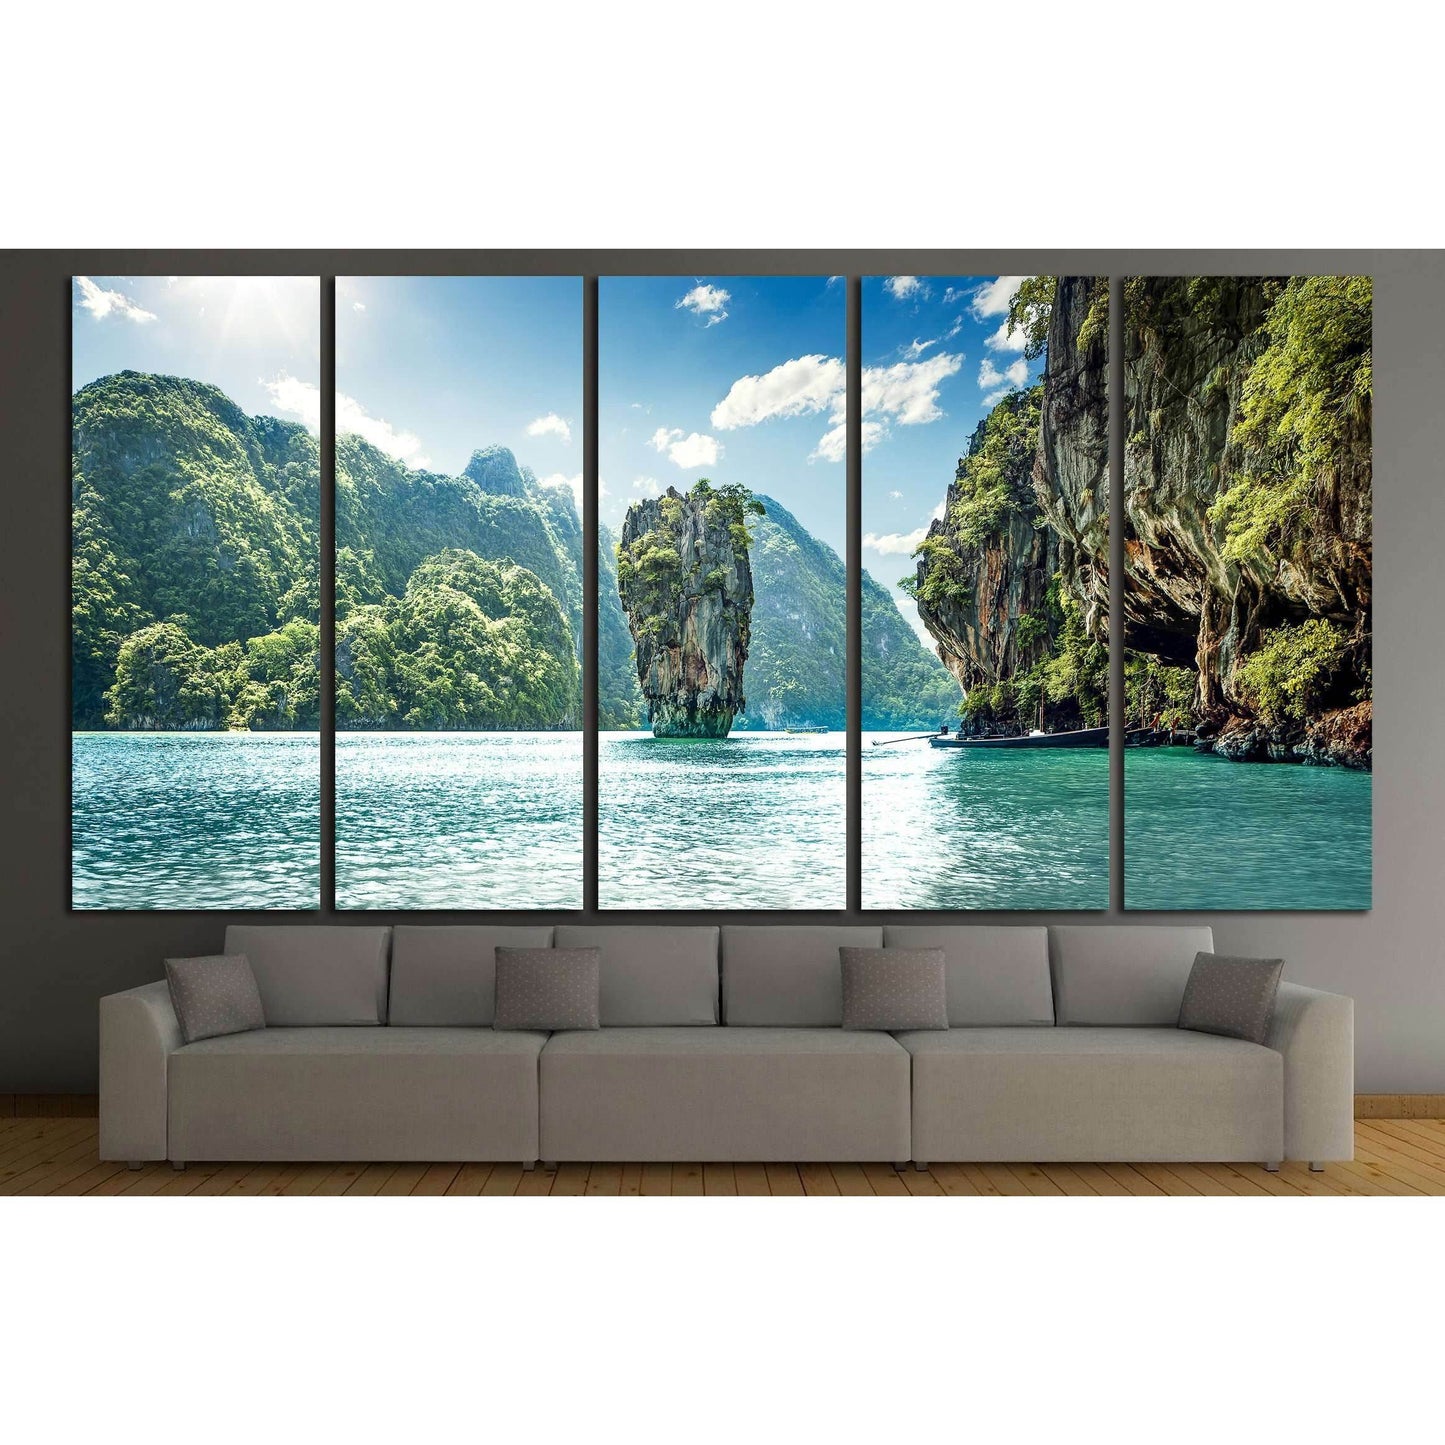 Tropical Limestone Karsts Canvas Print for Exotic Home DecorThis canvas print captures the majestic limestone karsts and emerald waters of a tropical paradise, reminiscent of Thailand's iconic Phi Phi Islands. It's a stunning visual escape, perfect for ad